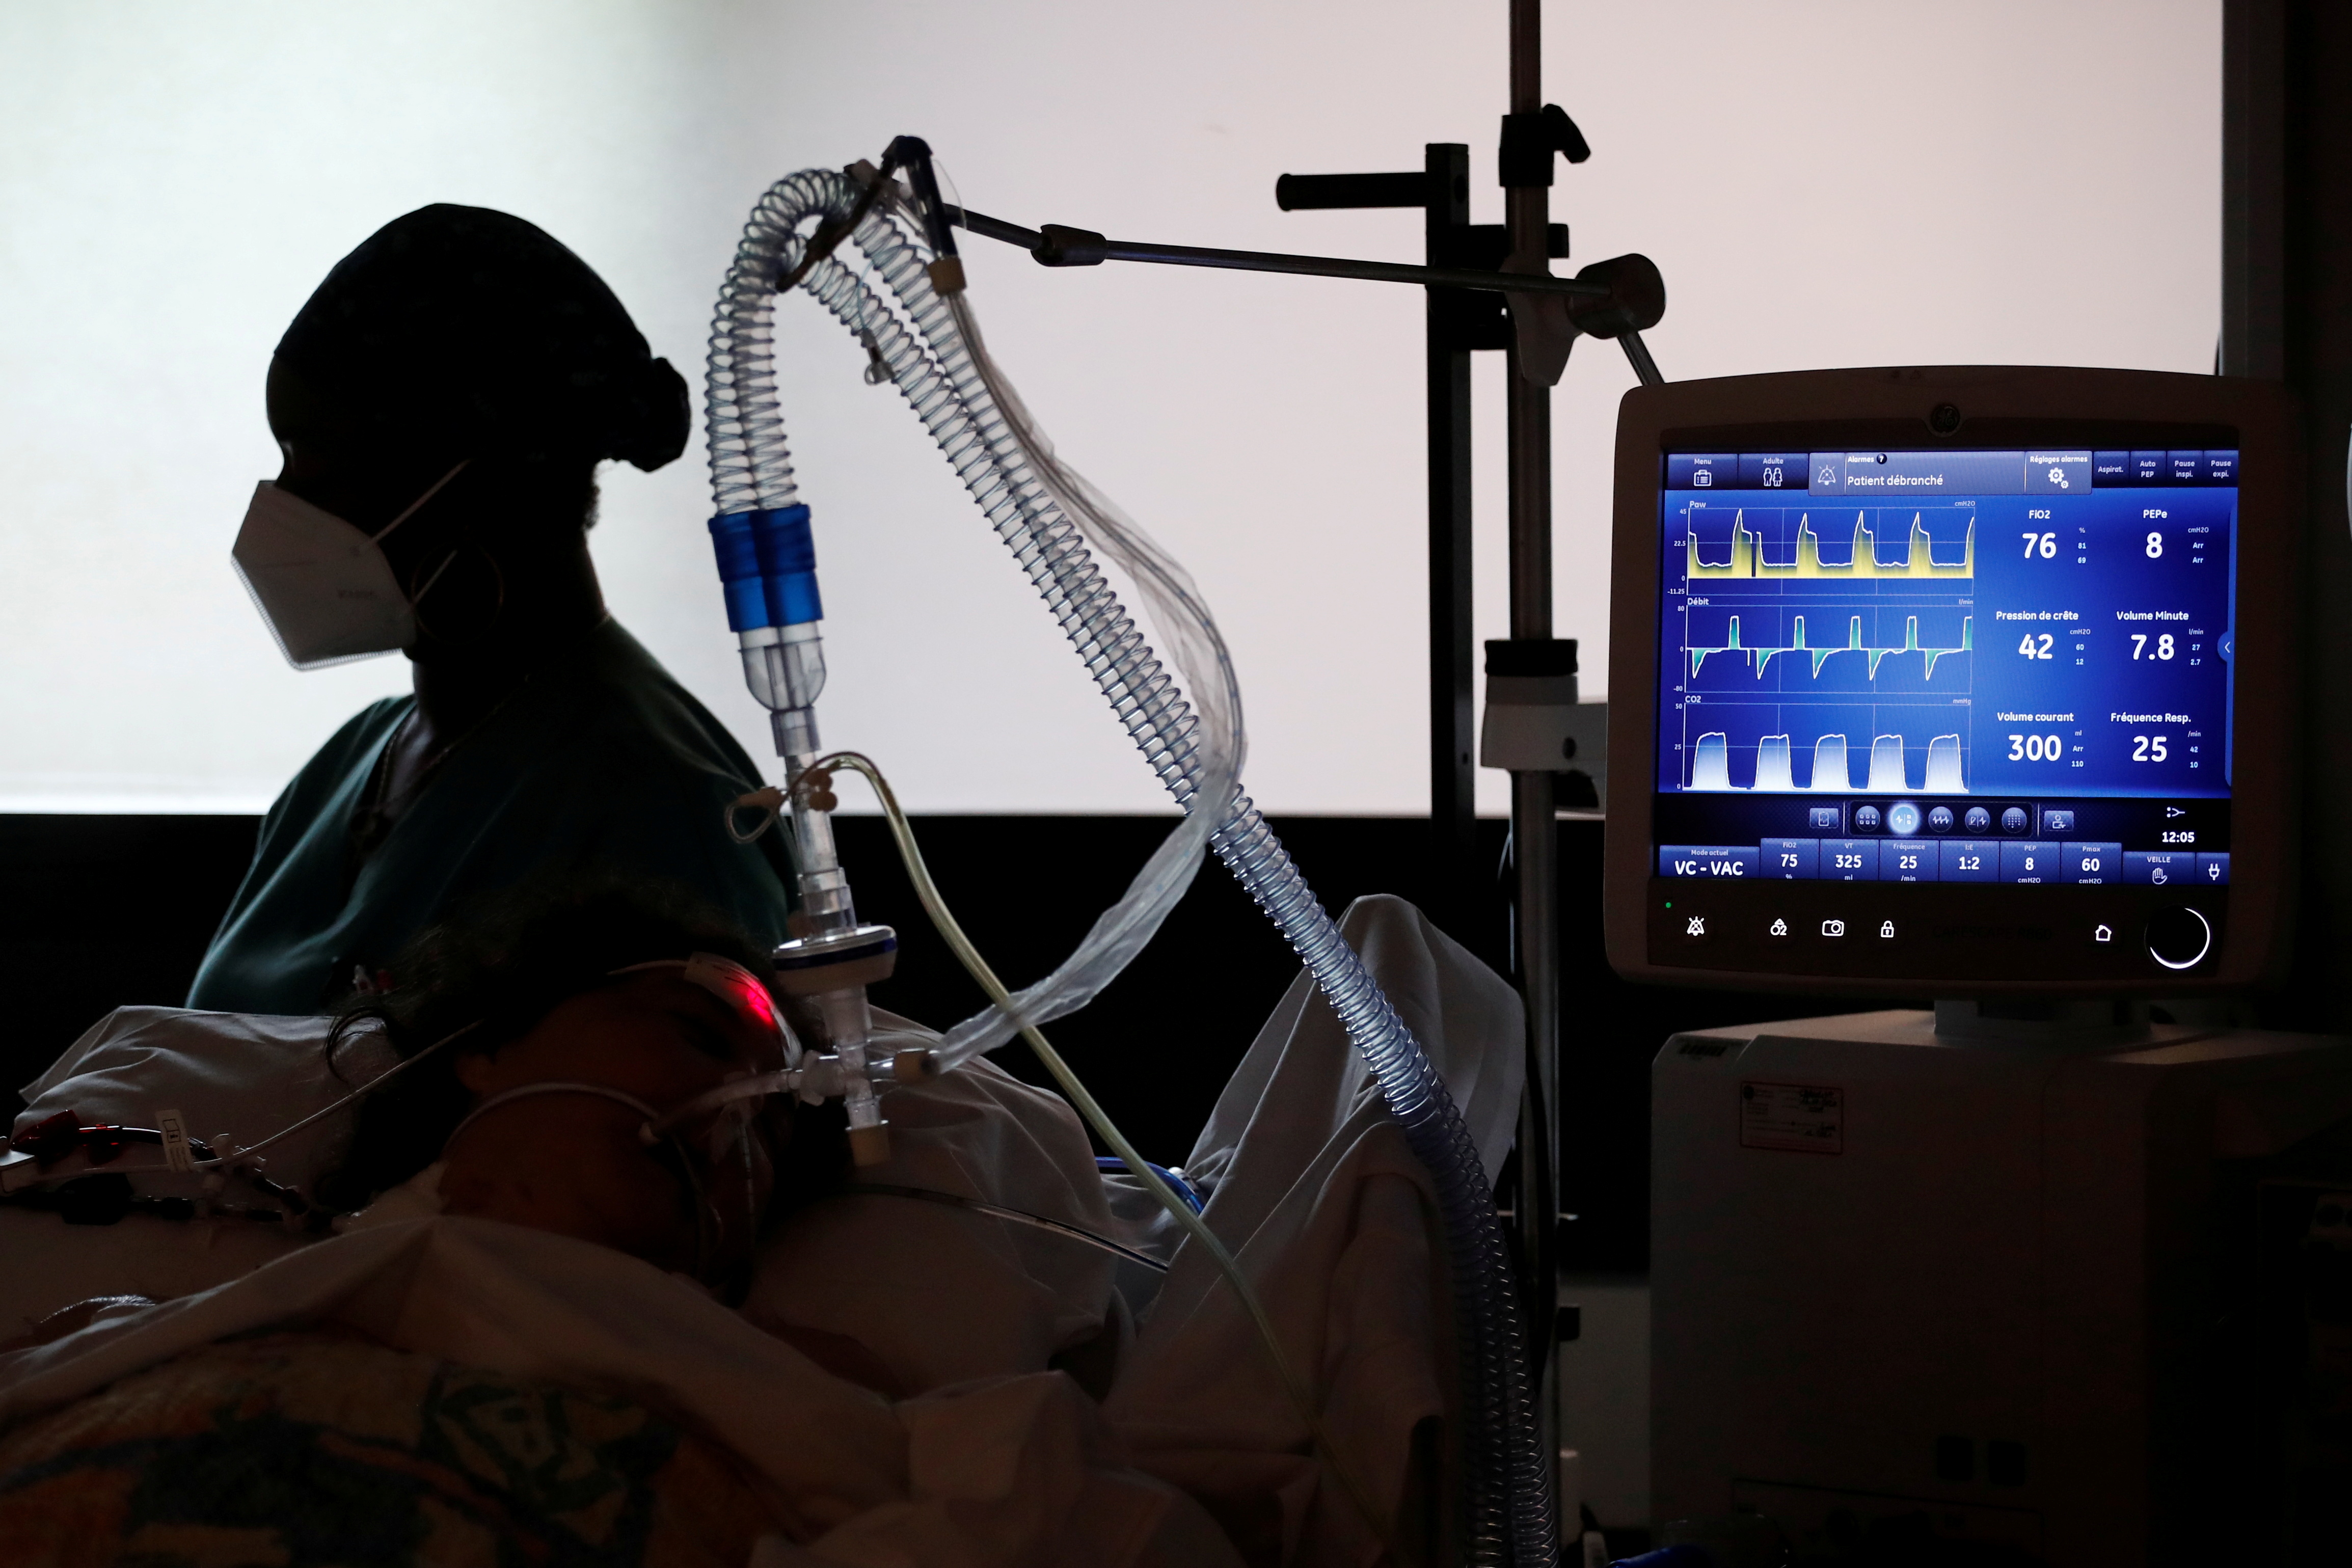 A COVID-19 patient connected to a ventilator tube in the Intensive Care Unit (ICU) at the Centre Cardiologique du Nord private hospital in Saint-Denis, near Paris, amid the coronavirus disease pandemic in France, May 4, 2021. REUTERS/Benoit Tessier